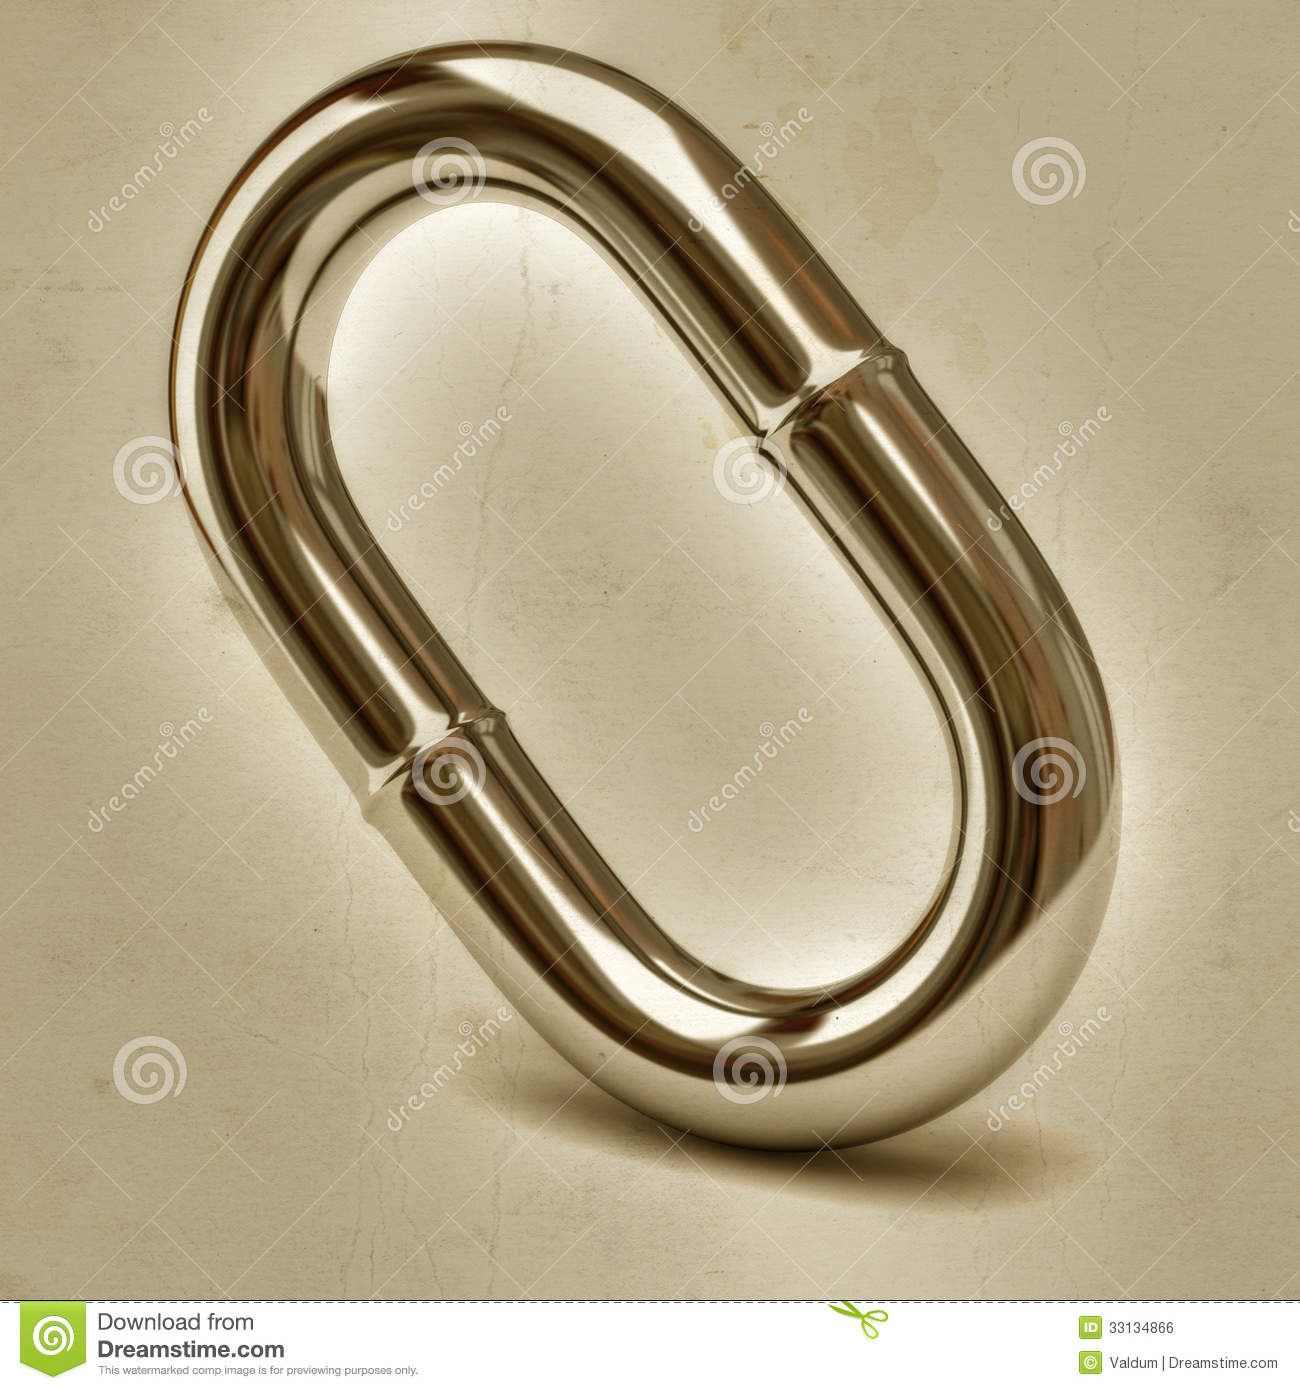 Silver Chain Link On Old Paper Royalty Free Stock Image   Image